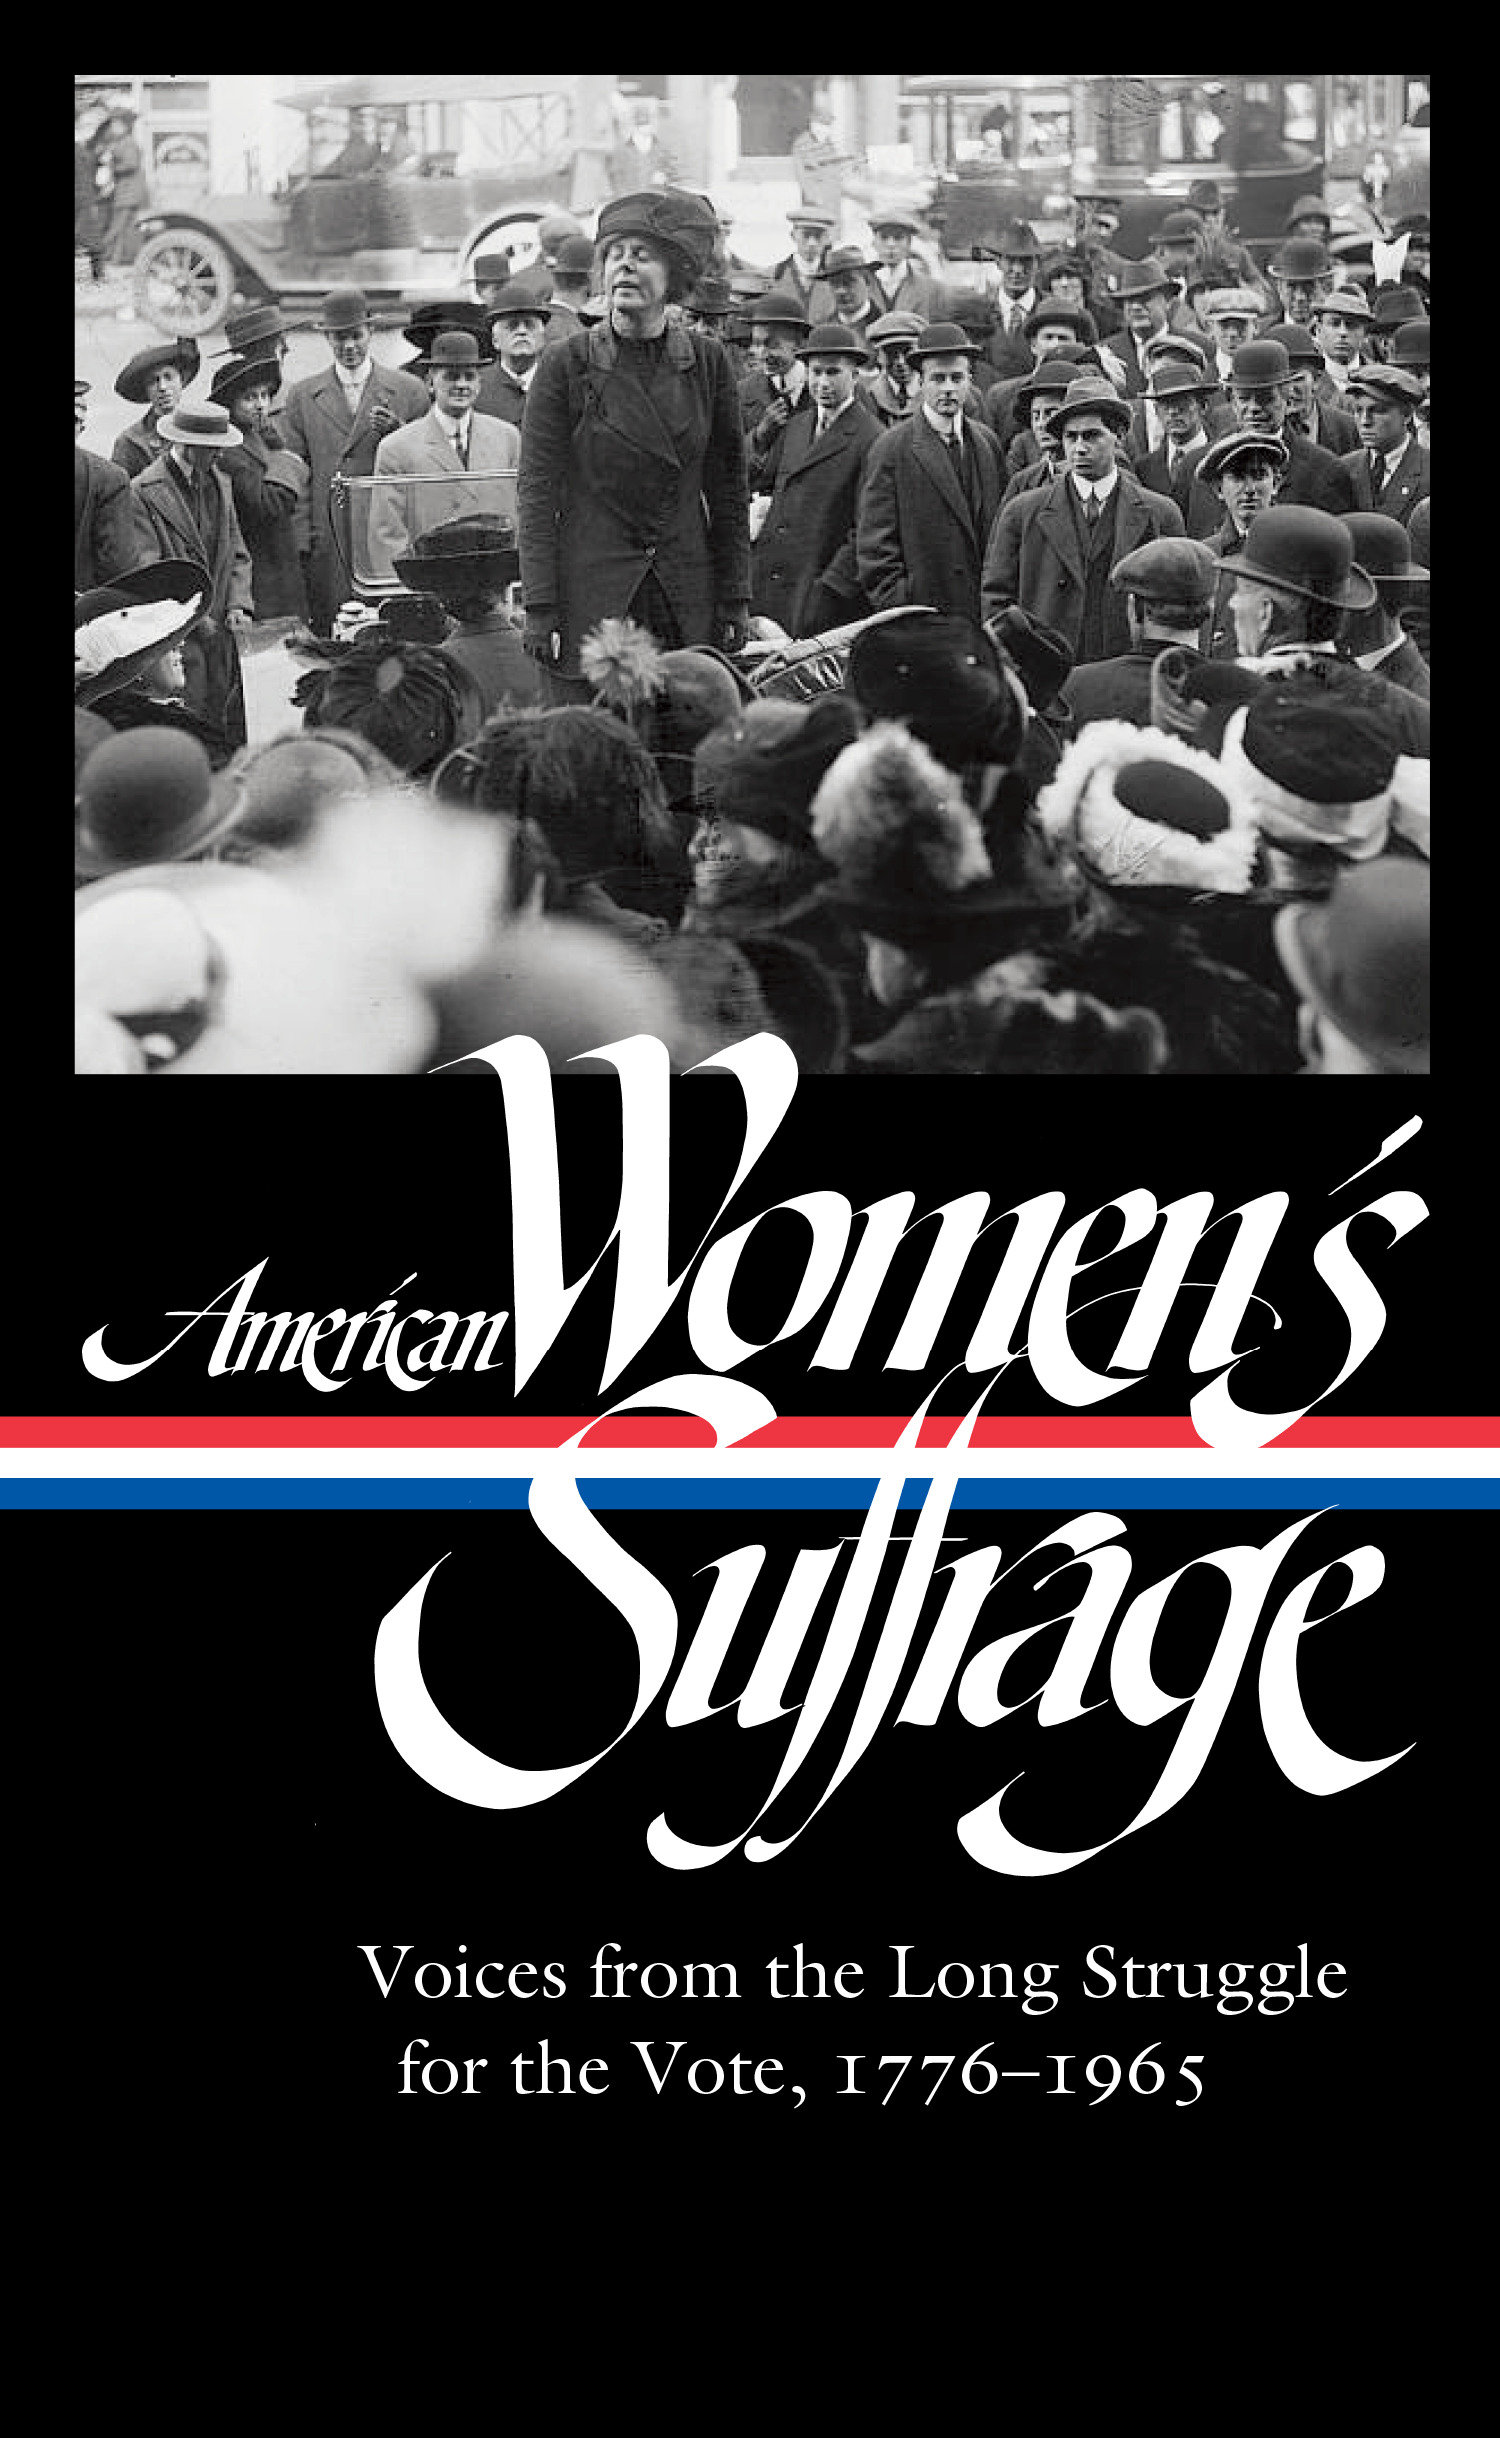 American women's suffrage voices from the long struggle for the vote 1776-1965 cover image